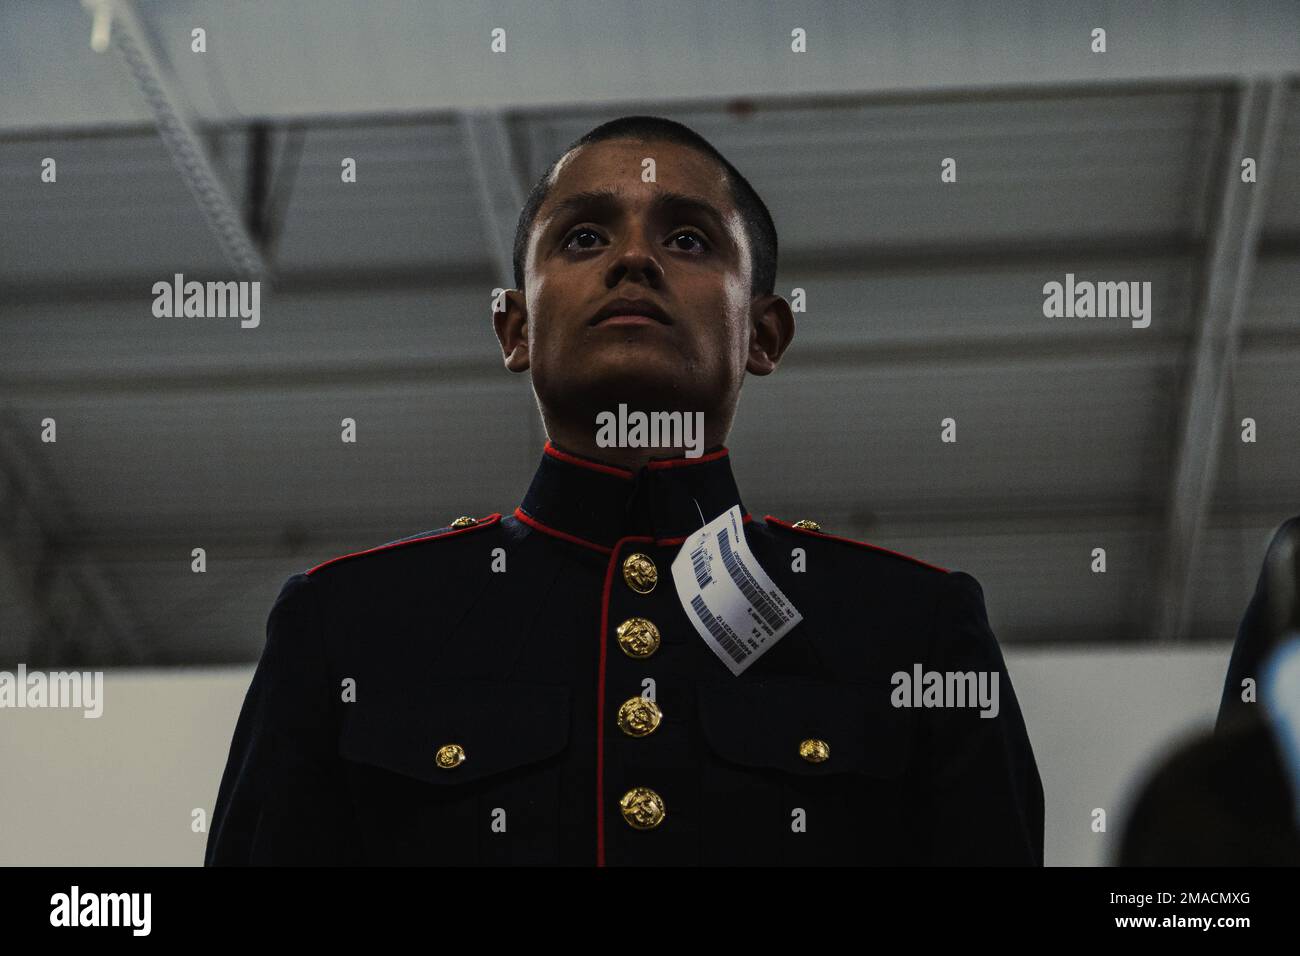 U.S Marine Corps recruit Jose Saldana with India Company, 3rd Recruit Training Battalion, tries on his uniform during his first uniform fitting at Marine Corps Recruit Depot, San Diego, May 25, 2022. Recruits are fitted several times throughout recruit training to ensure their uniforms are ready to be worn as Marines.Saldana was recruited out of Modesto, Calif. with Recruiting Station Sacramento. Stock Photo